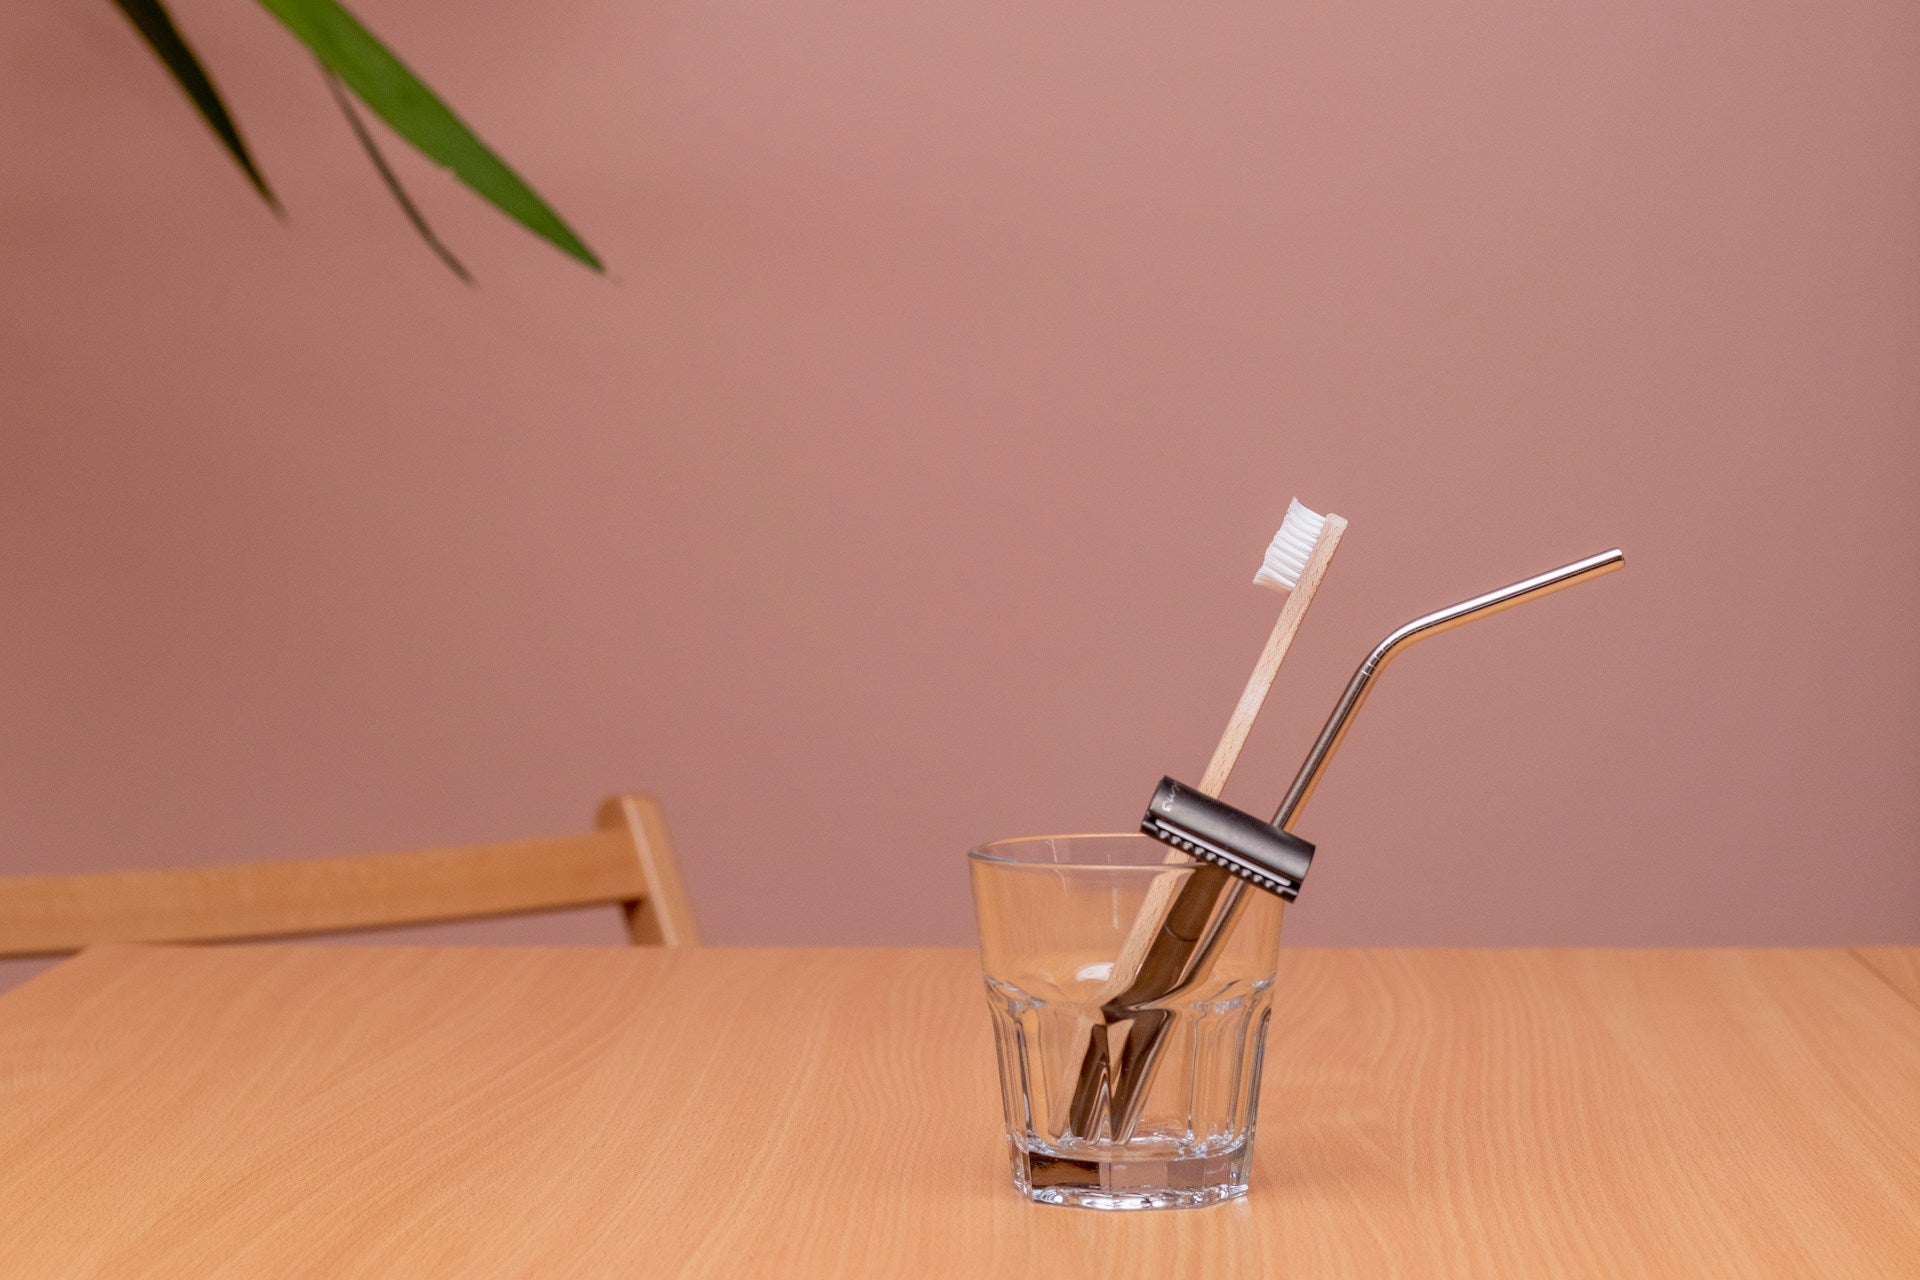 A clear glass cup holding a safety razor, bamboo toothbrush, and stainless steel straw in front of a mauve background